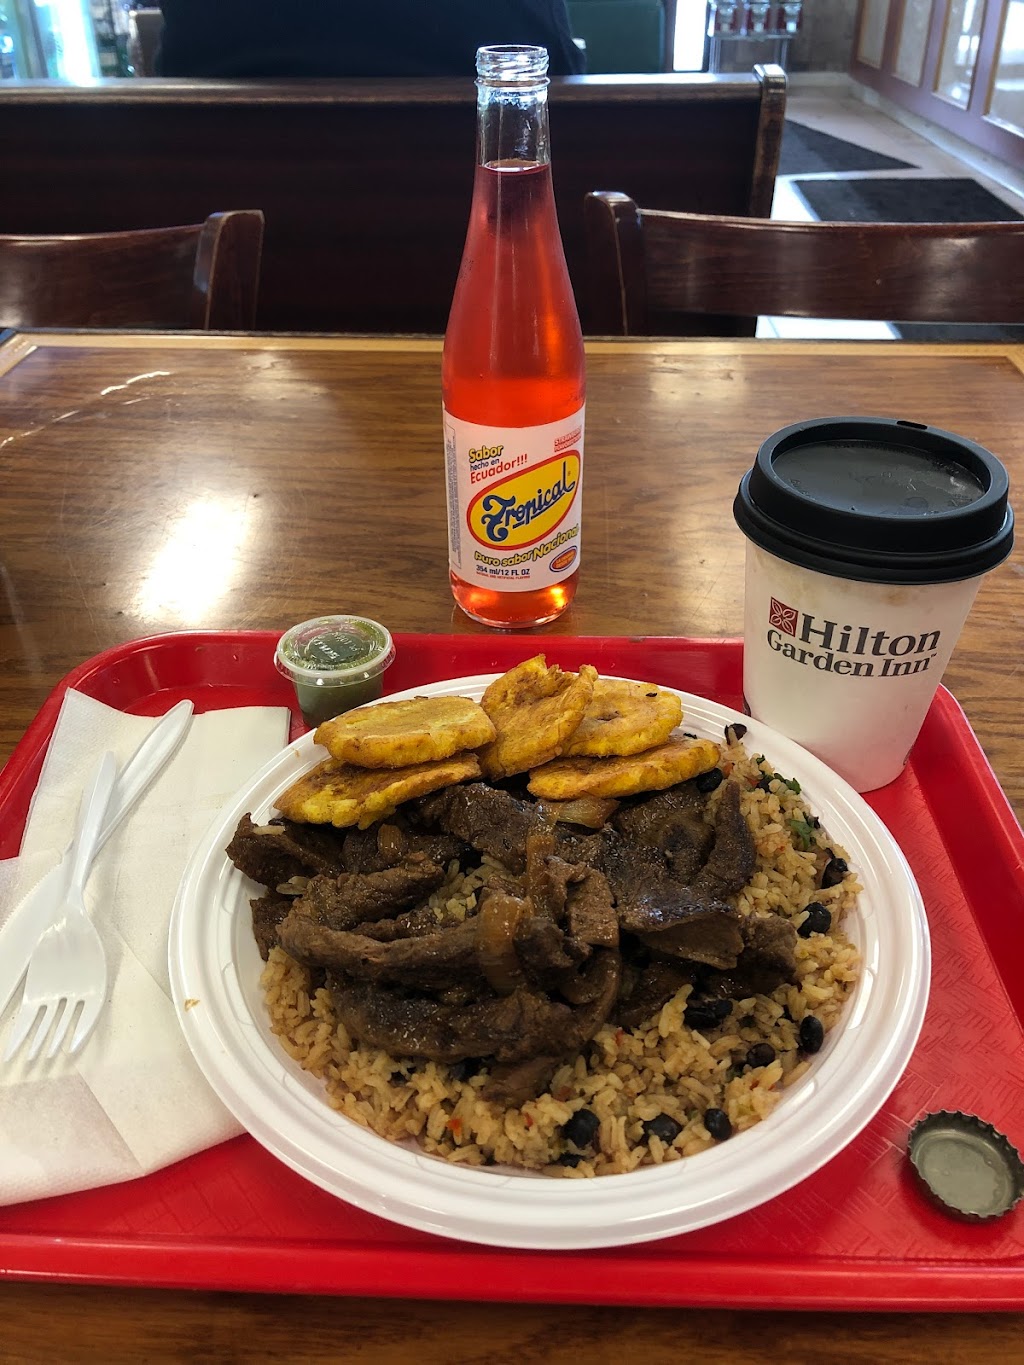 American Deli Latino | 192 Old Country Rd, Riverhead, NY 11901 | Phone: (631) 591-9028